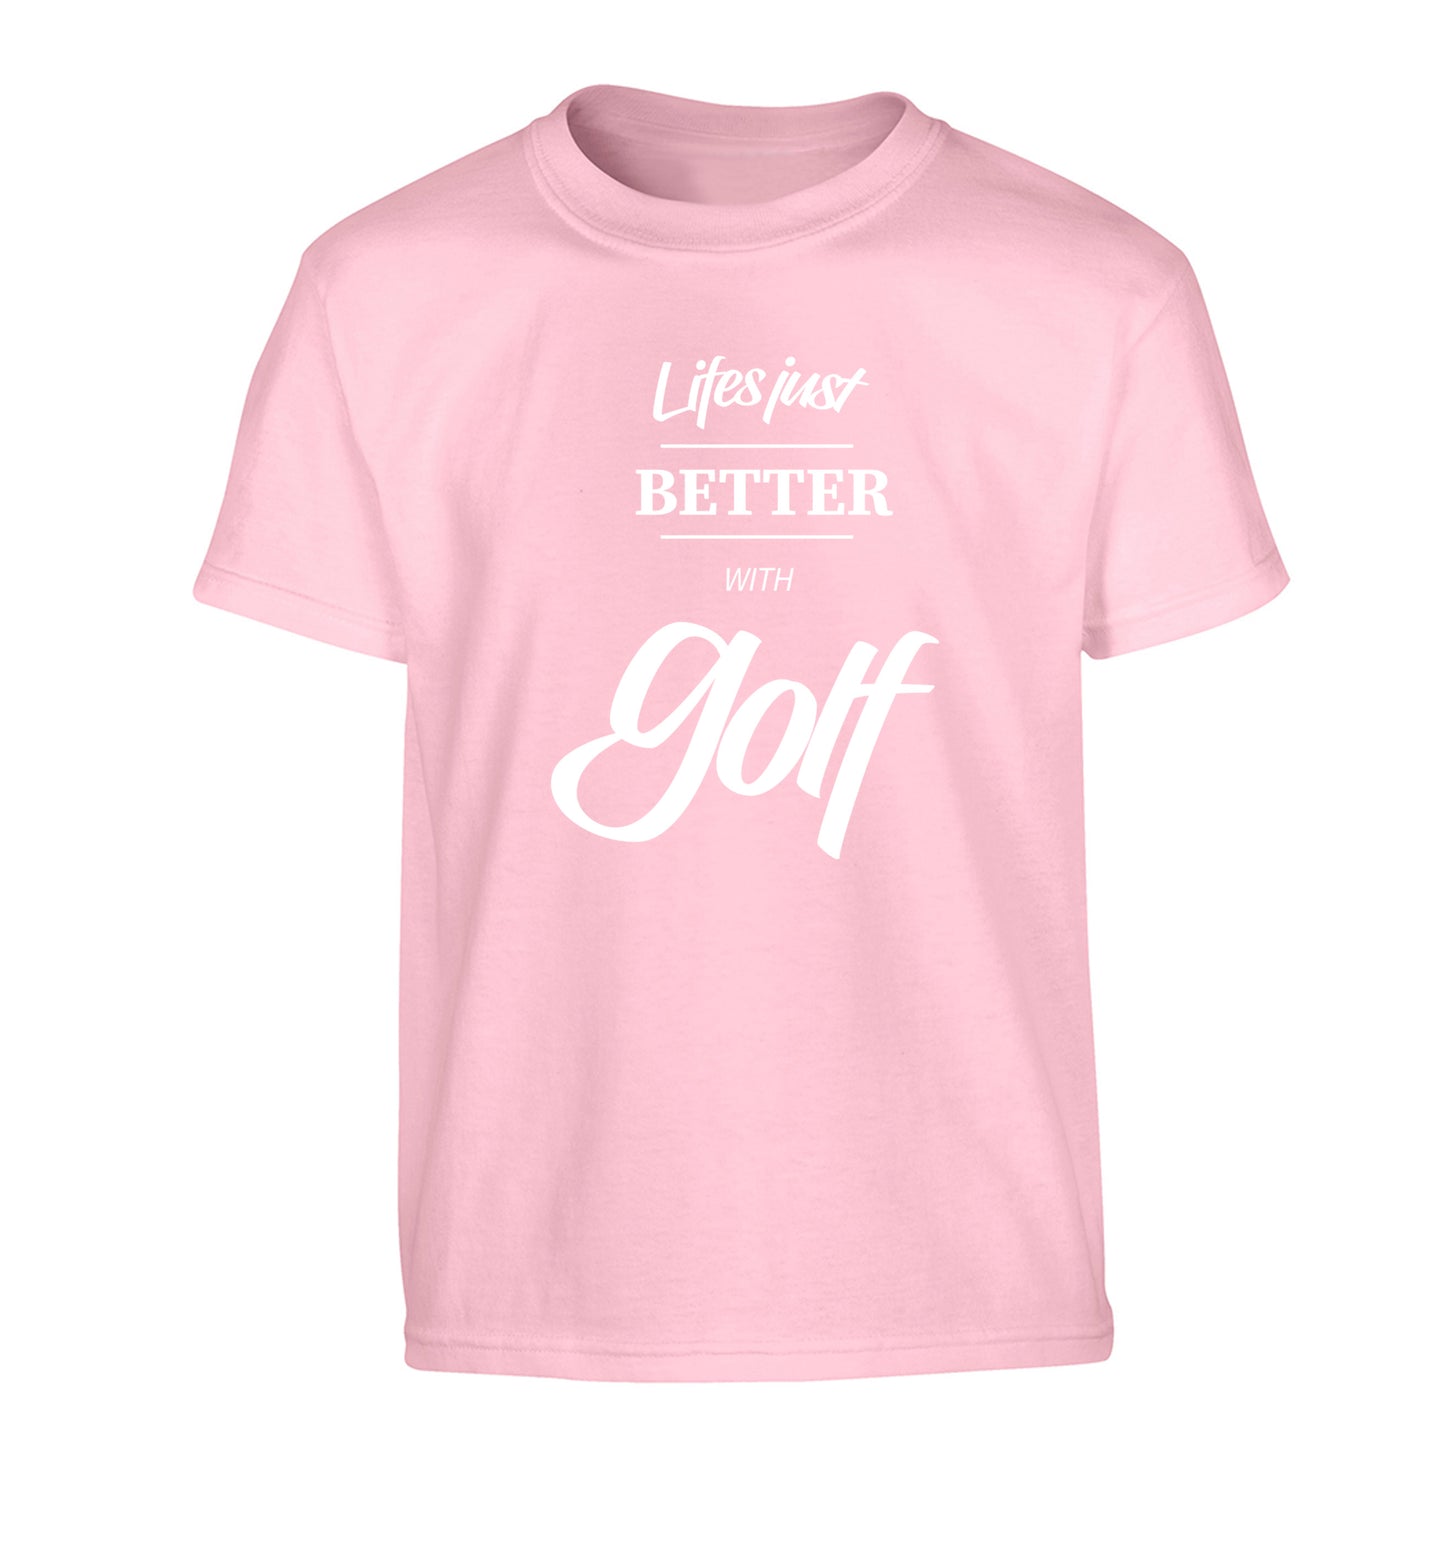 Life is better with golf Children's light pink Tshirt 12-13 Years